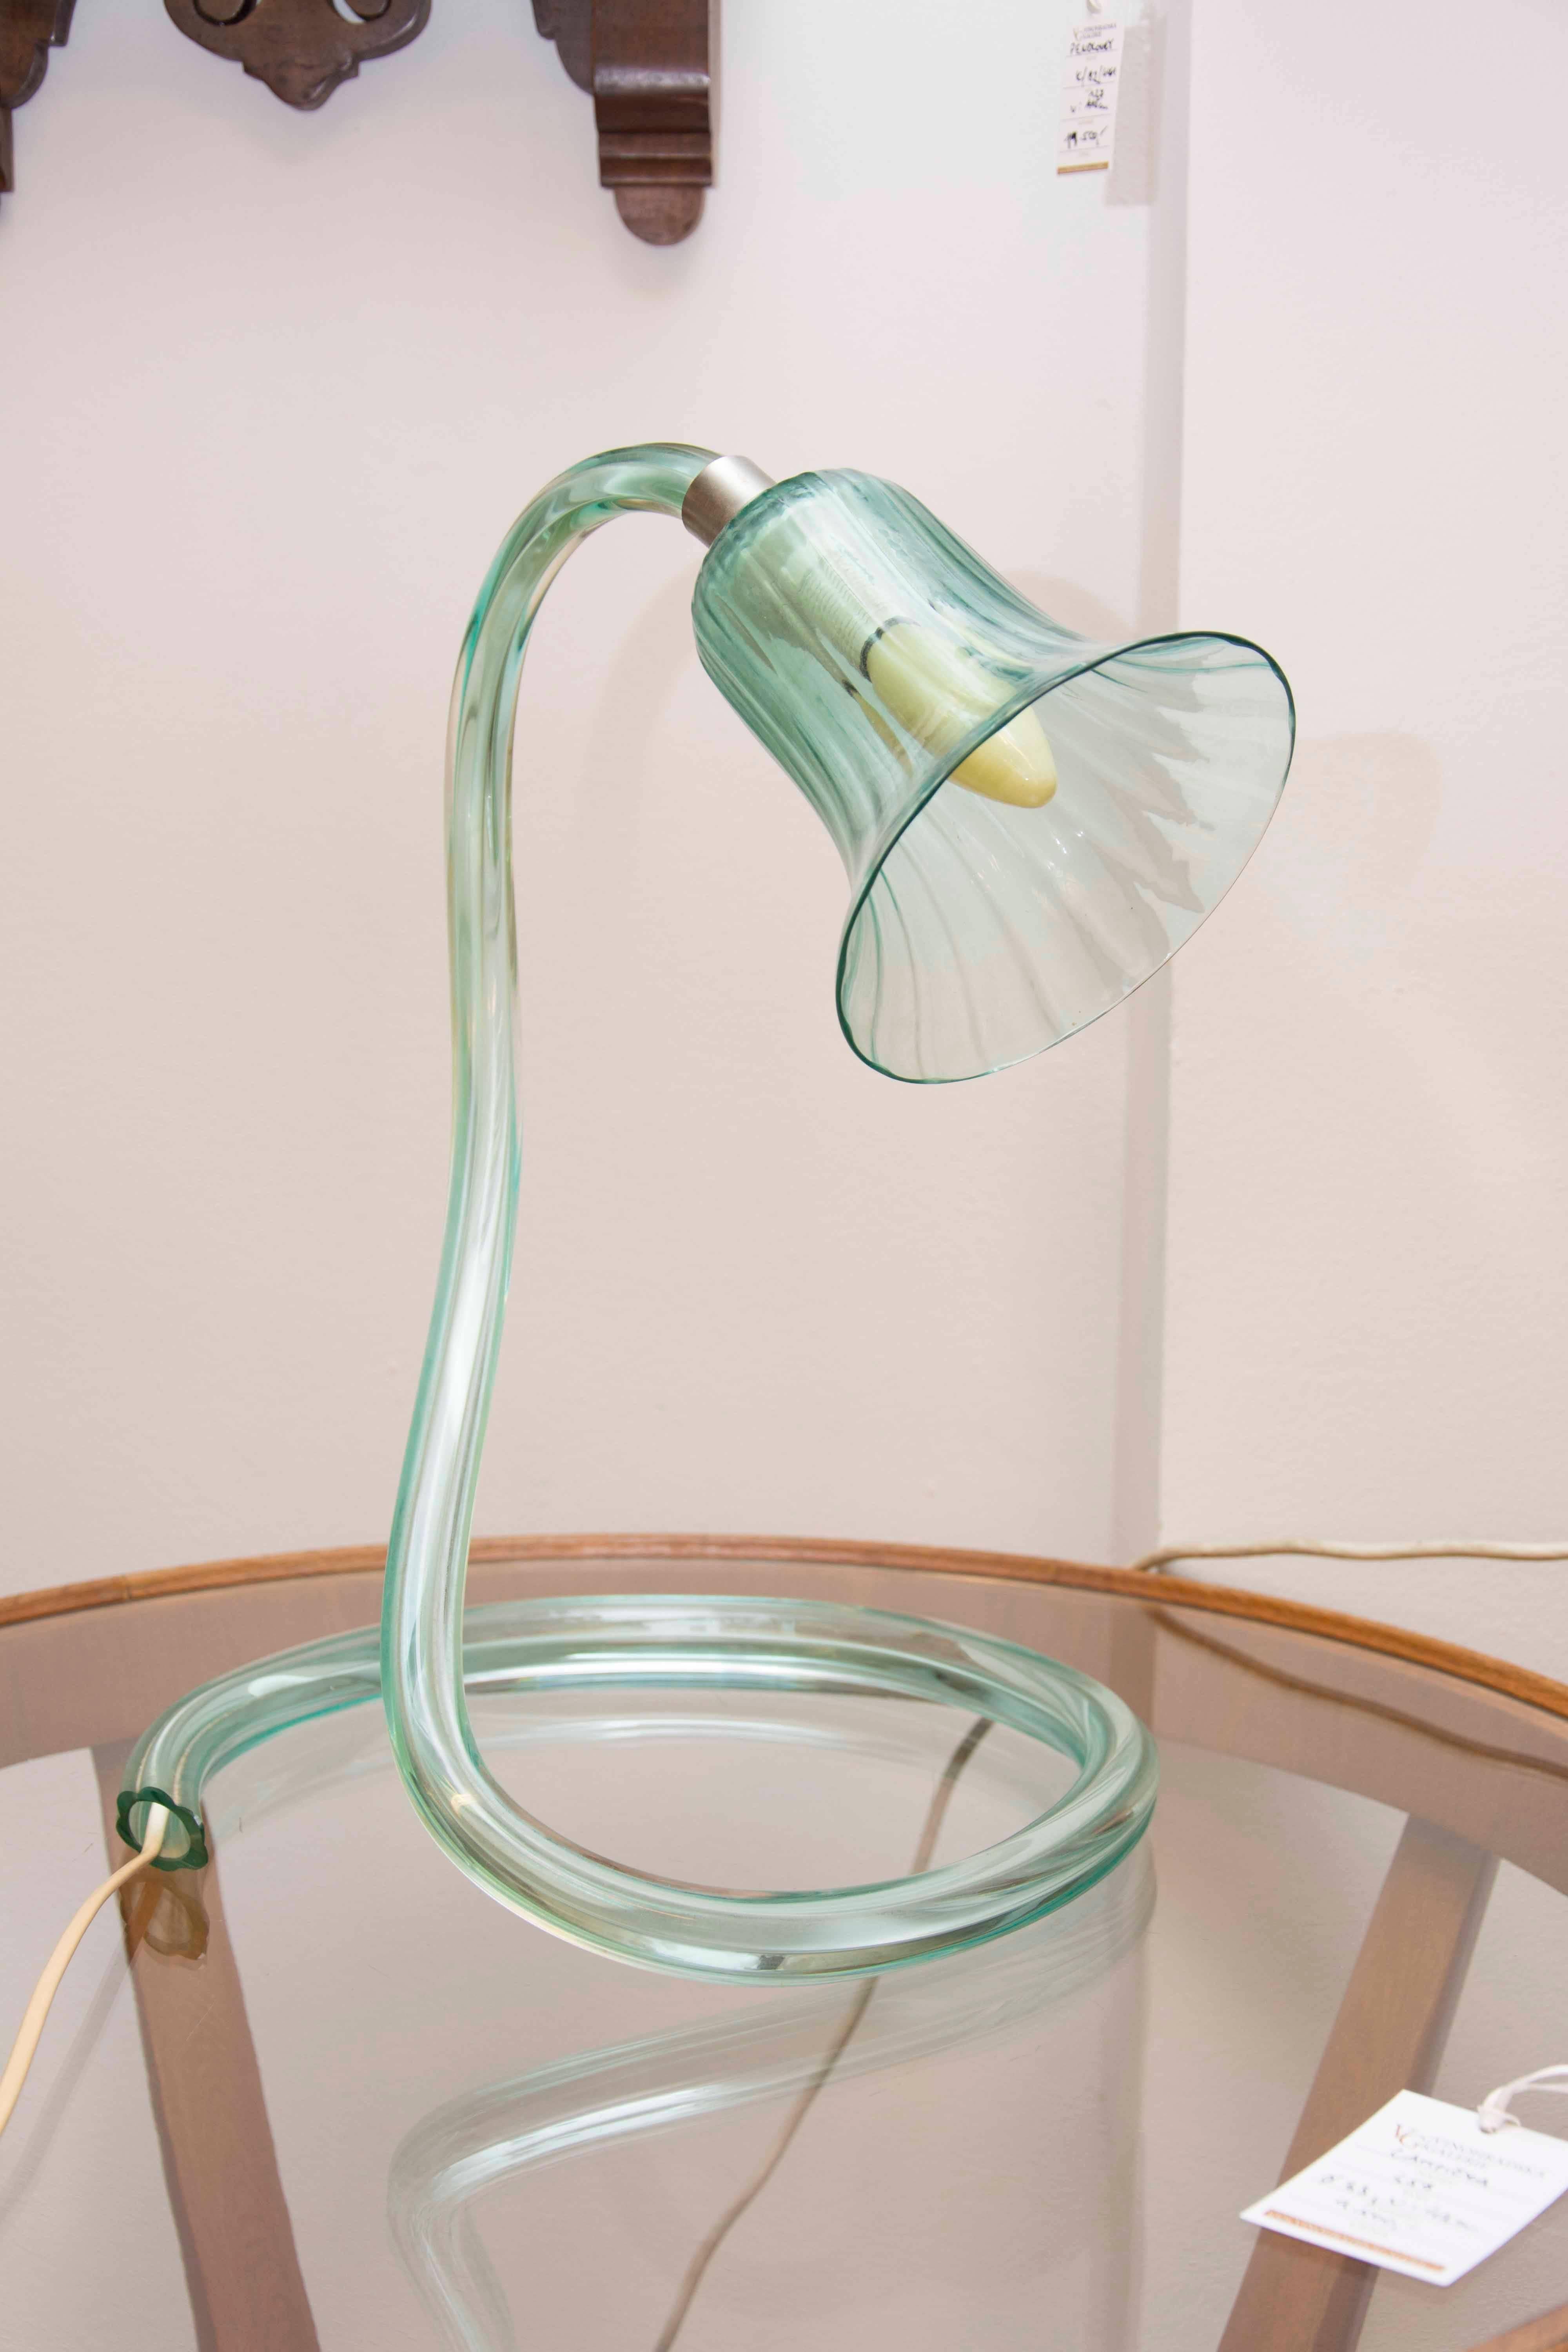 This magnificent light green Murano glass lamp was made in the middle of the last century in Italia. It is sensitive to the shape of a swan. It is in excellent condition with new wiring.